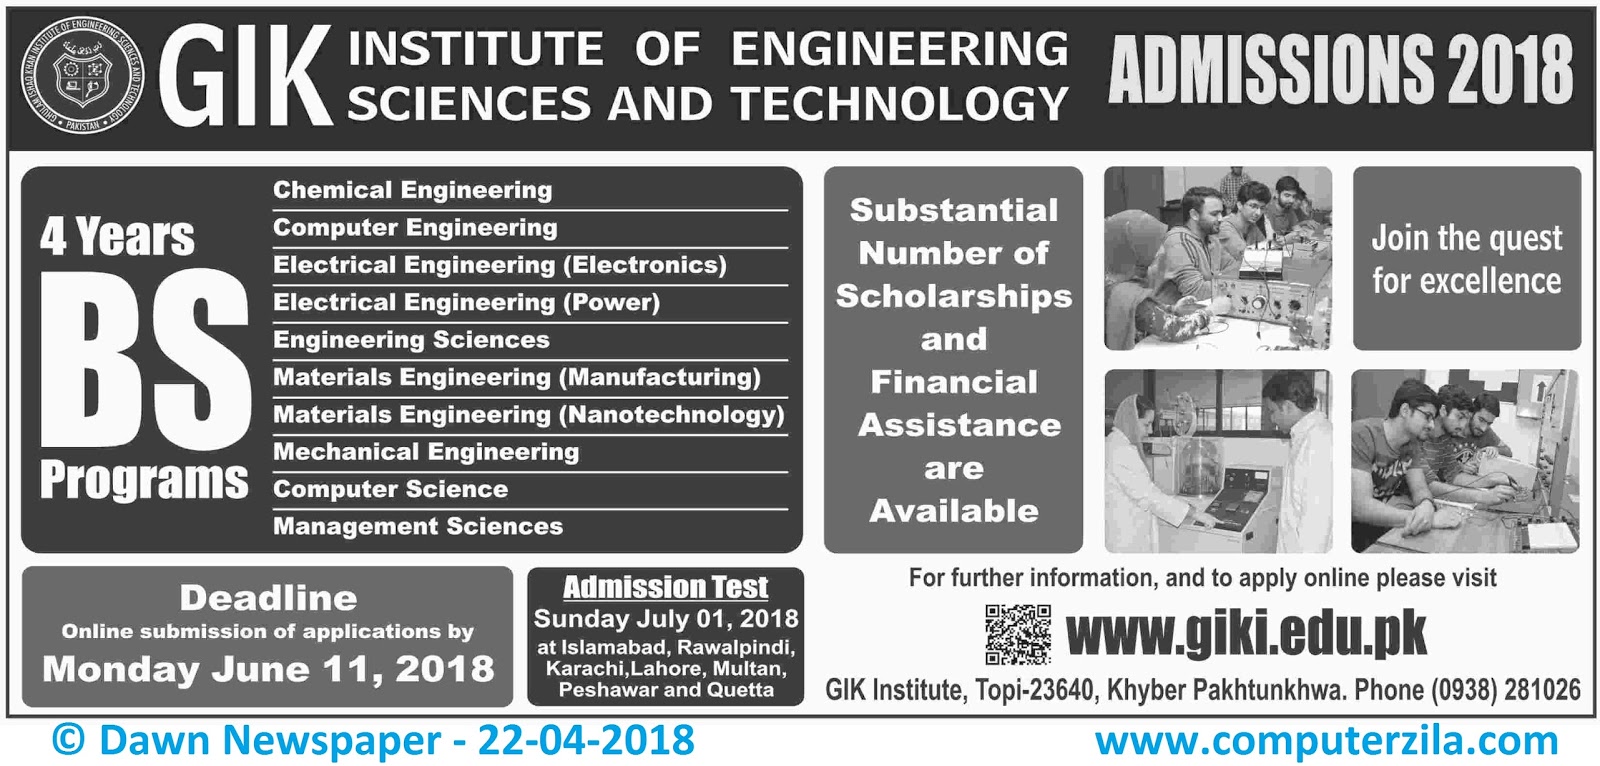 GIK Institute of Engineering, Sciences and Technology Admissions Fall 2018